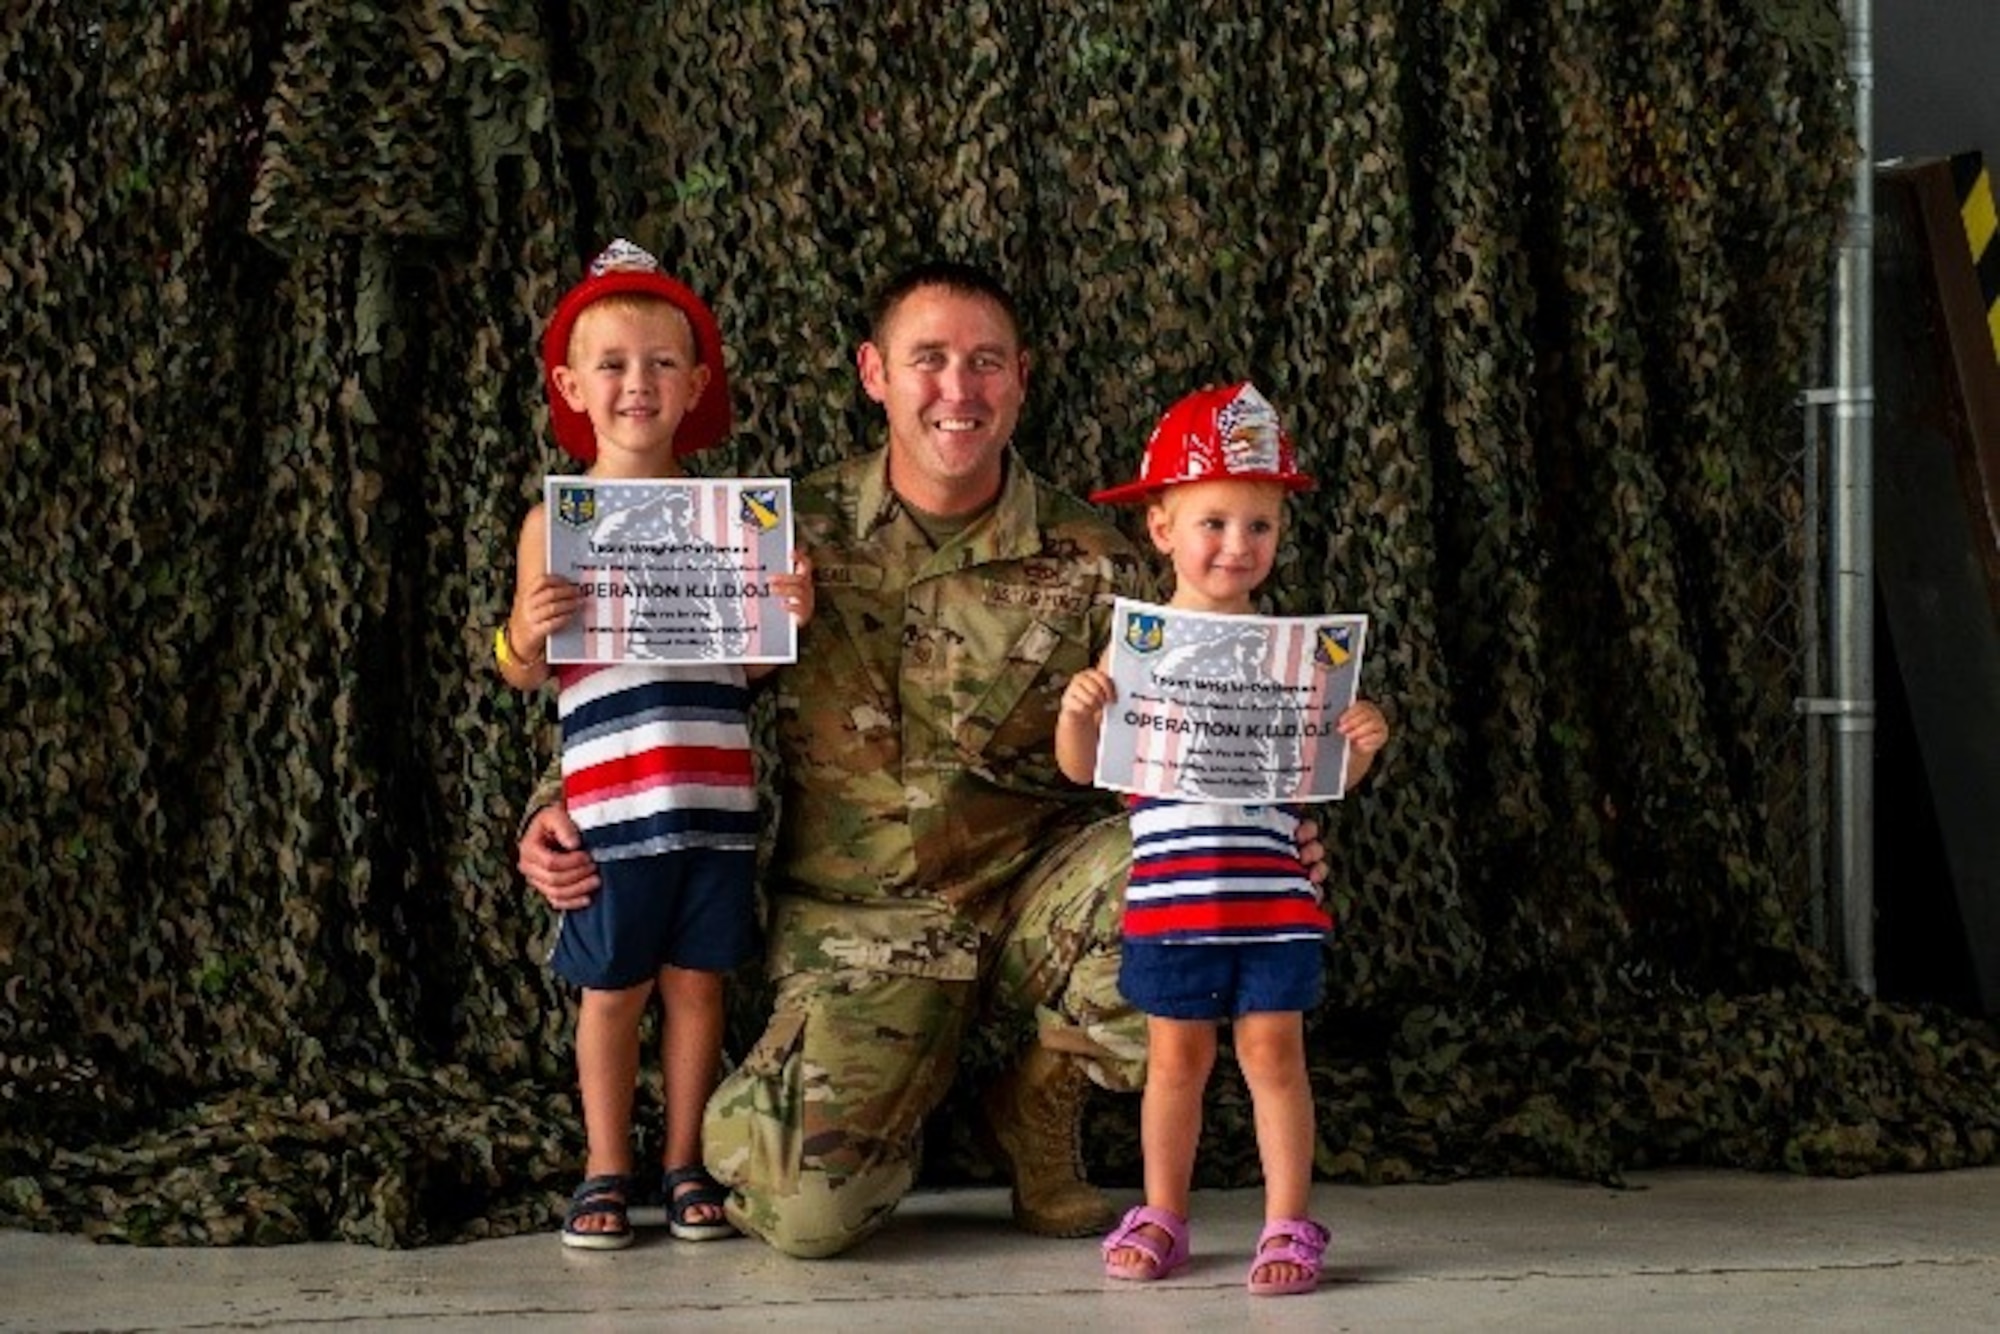 Senior Master Sgt. Justin Musall, 88th Air Base Wing Safety Office superintendent. and his children pose for a photo after Operation KUDOS on July 28 at Wright-Patterson Air Force Base, Ohio. The children who participated in the Kids Understanding Deployment Operations event were awarded a certificate at the end for their efforts. (U.S. Air Force photo by Airman 1st Class James Johnson)